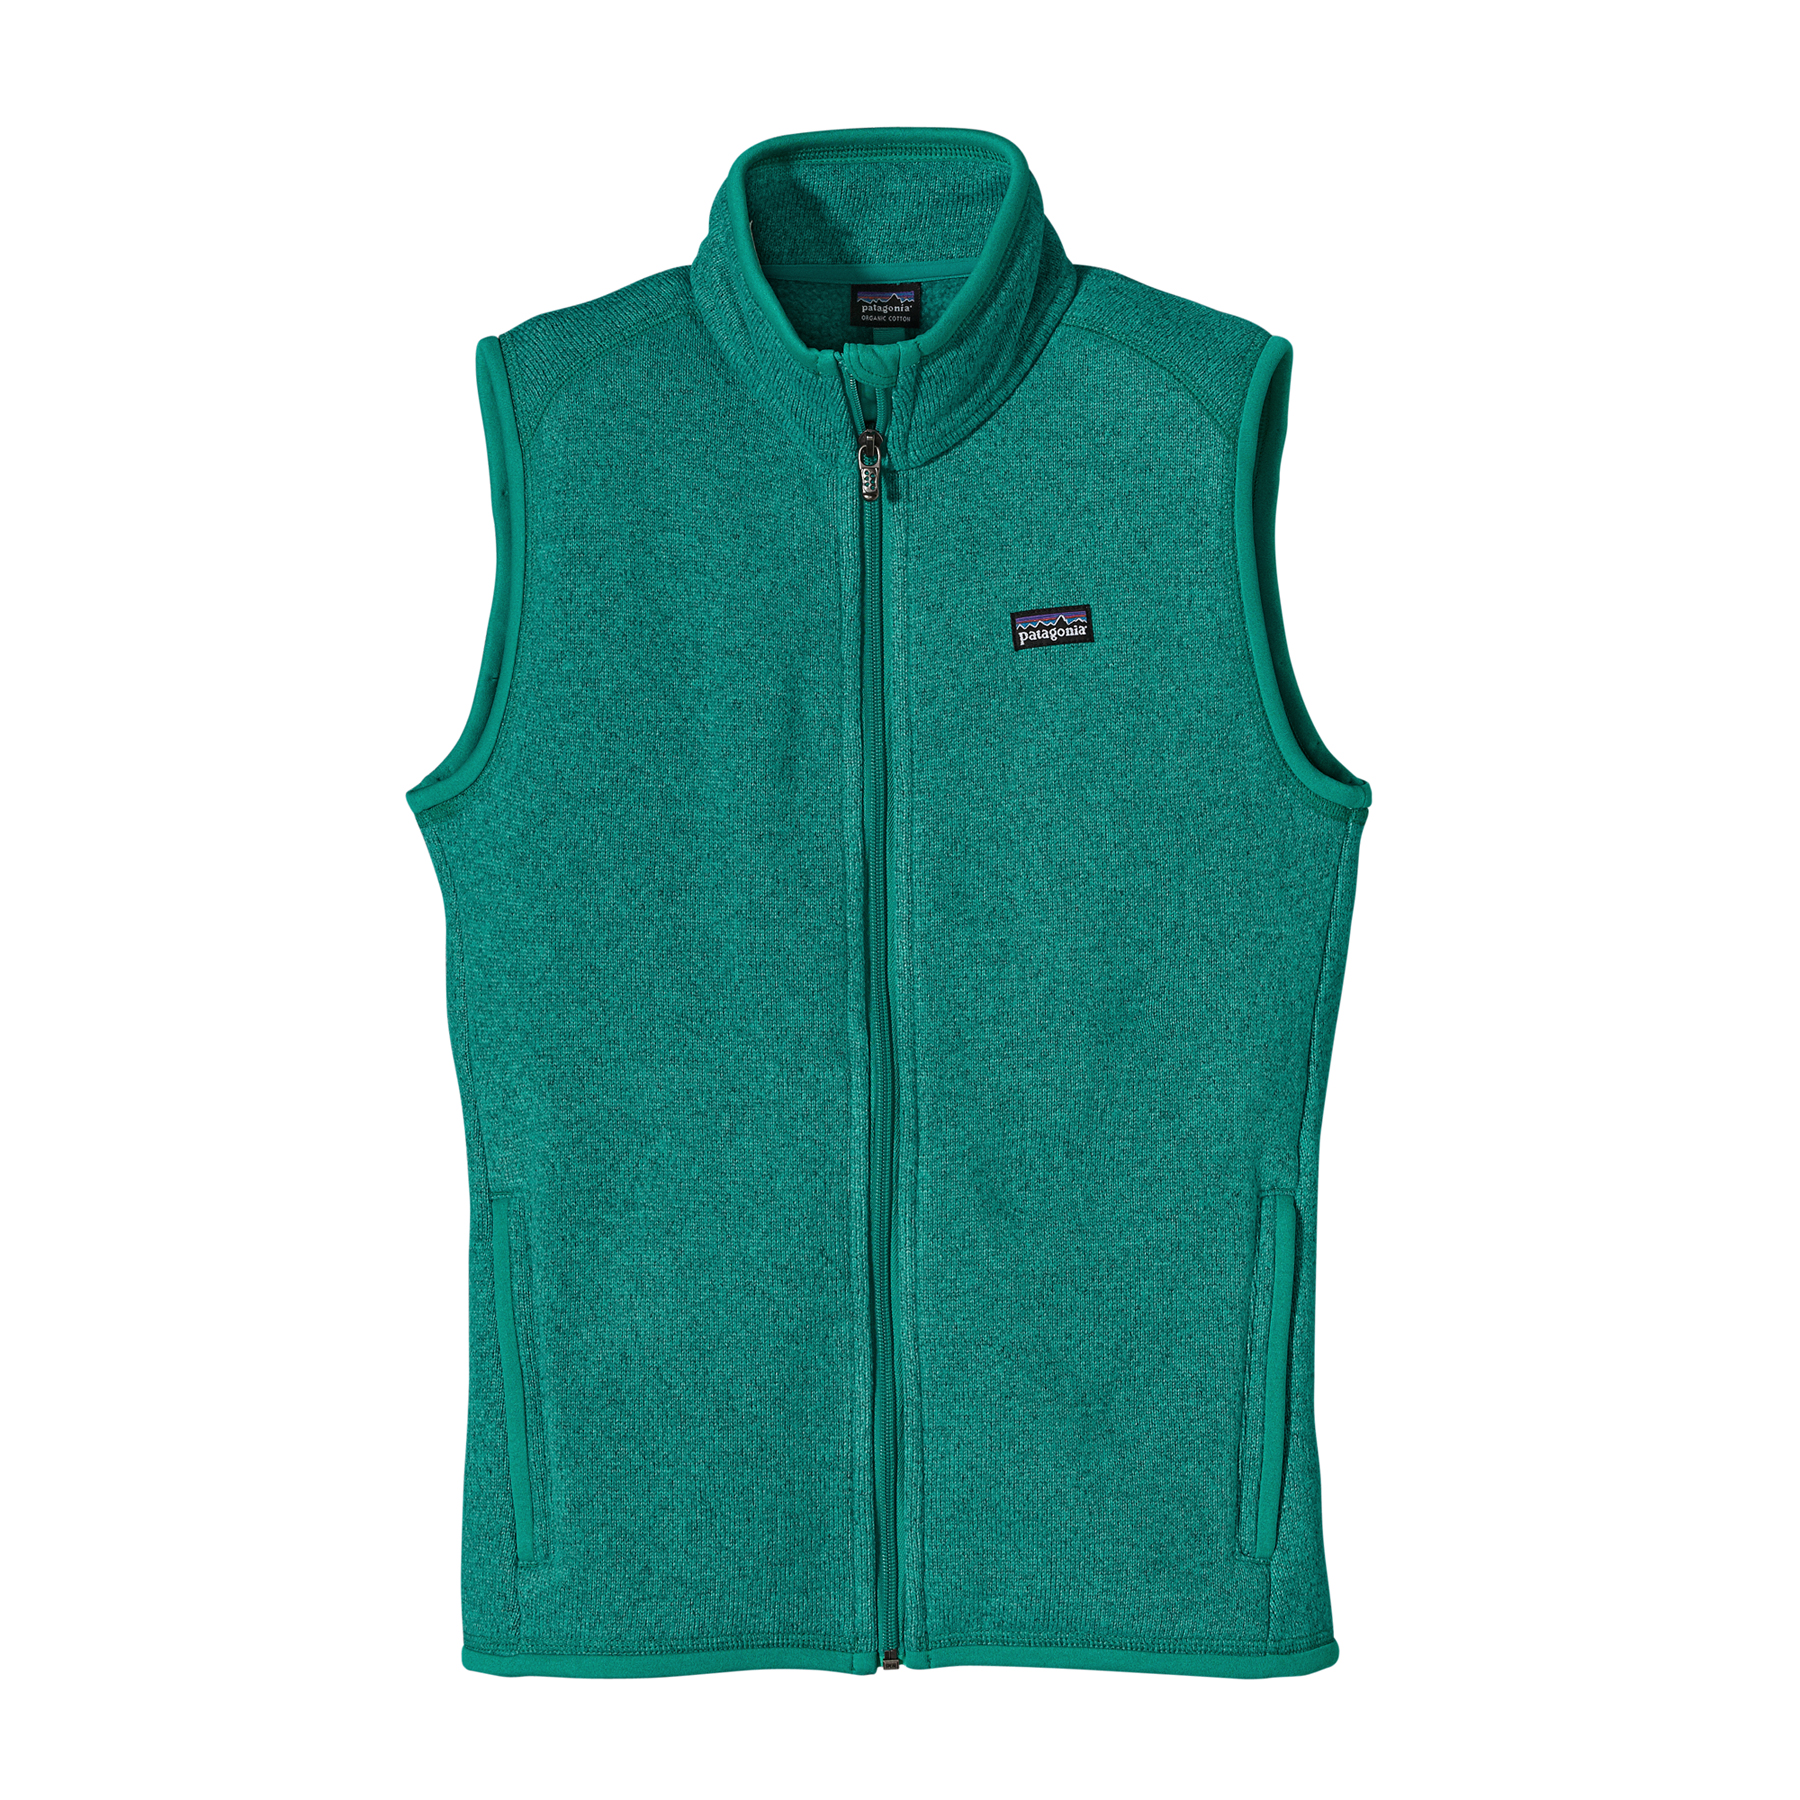 Foto Patagonia Better Sweater™ Vest Lady Teal Green (Modell 2013) foto 591255